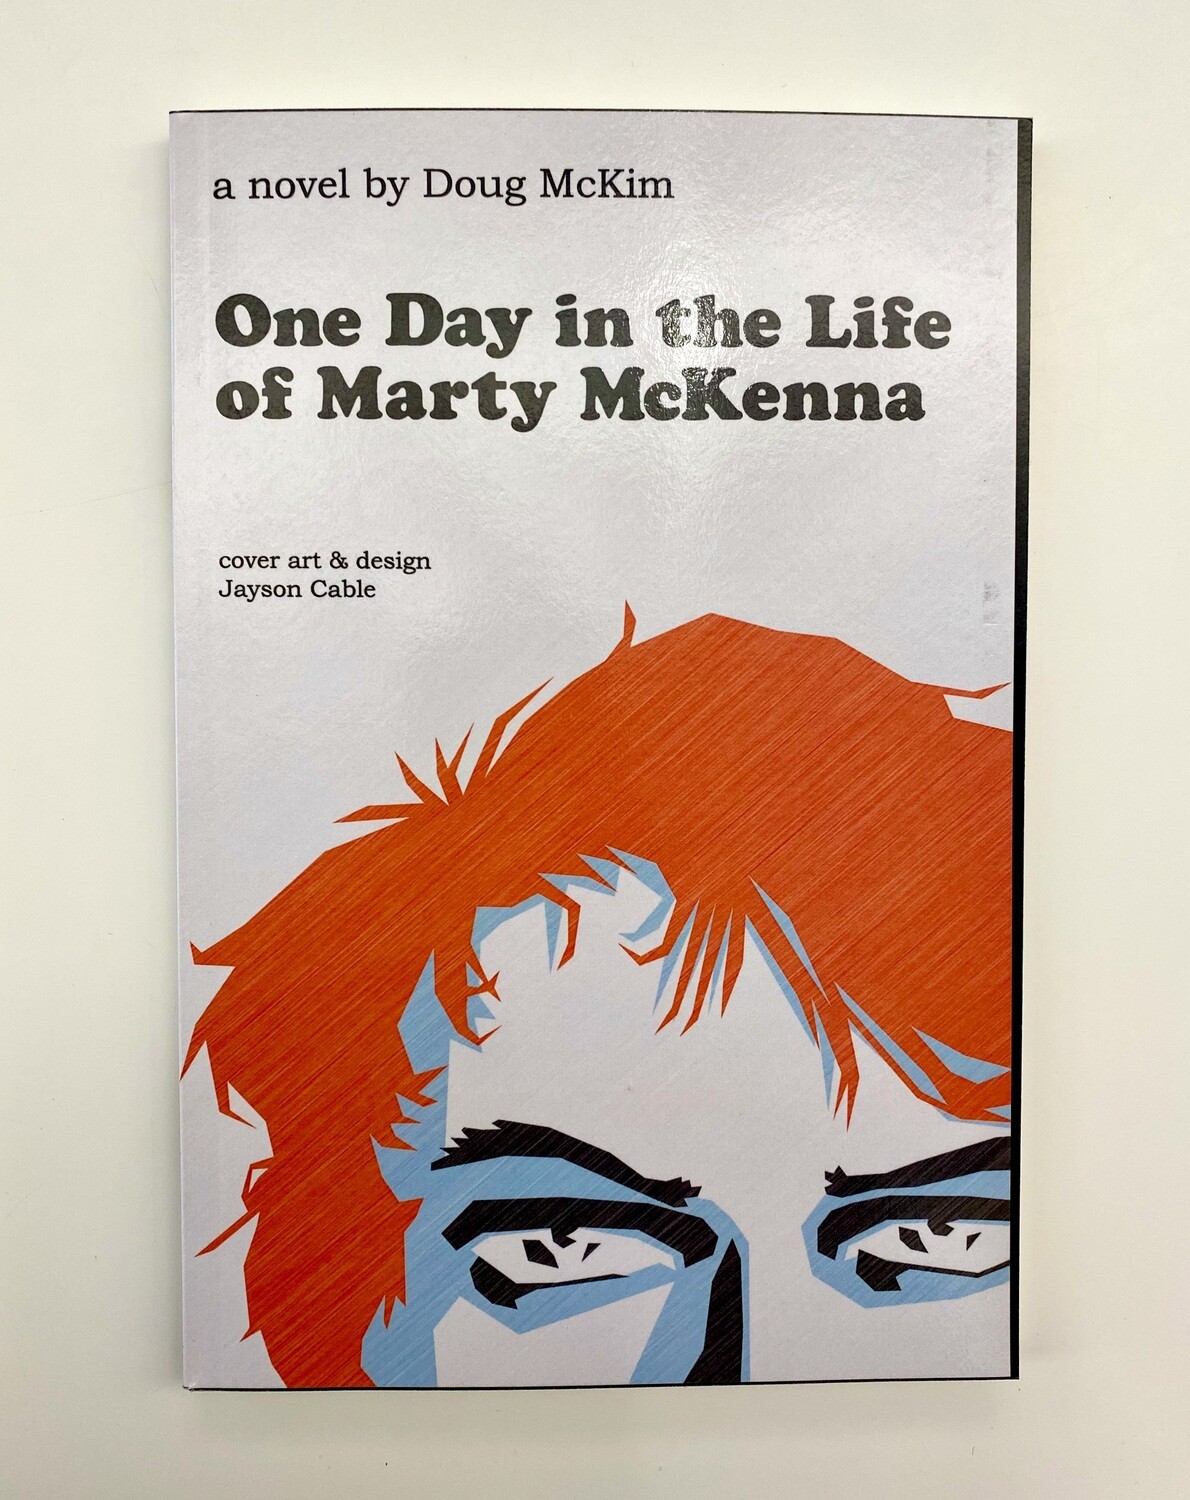 NEW - One Day in the Life of Marty McKenna, Doug McKim